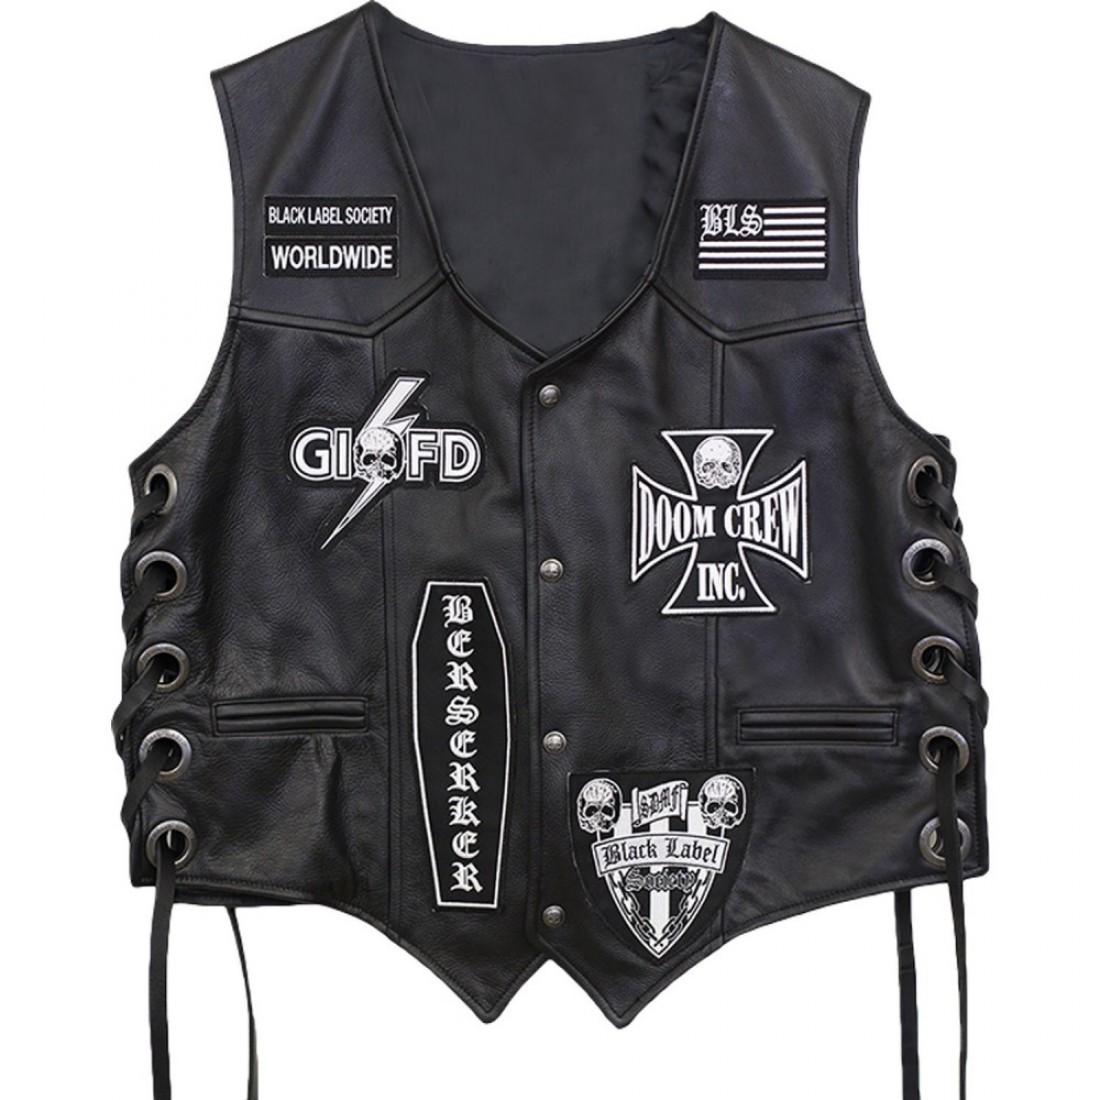 Black label society vests for sale cash from investing activities